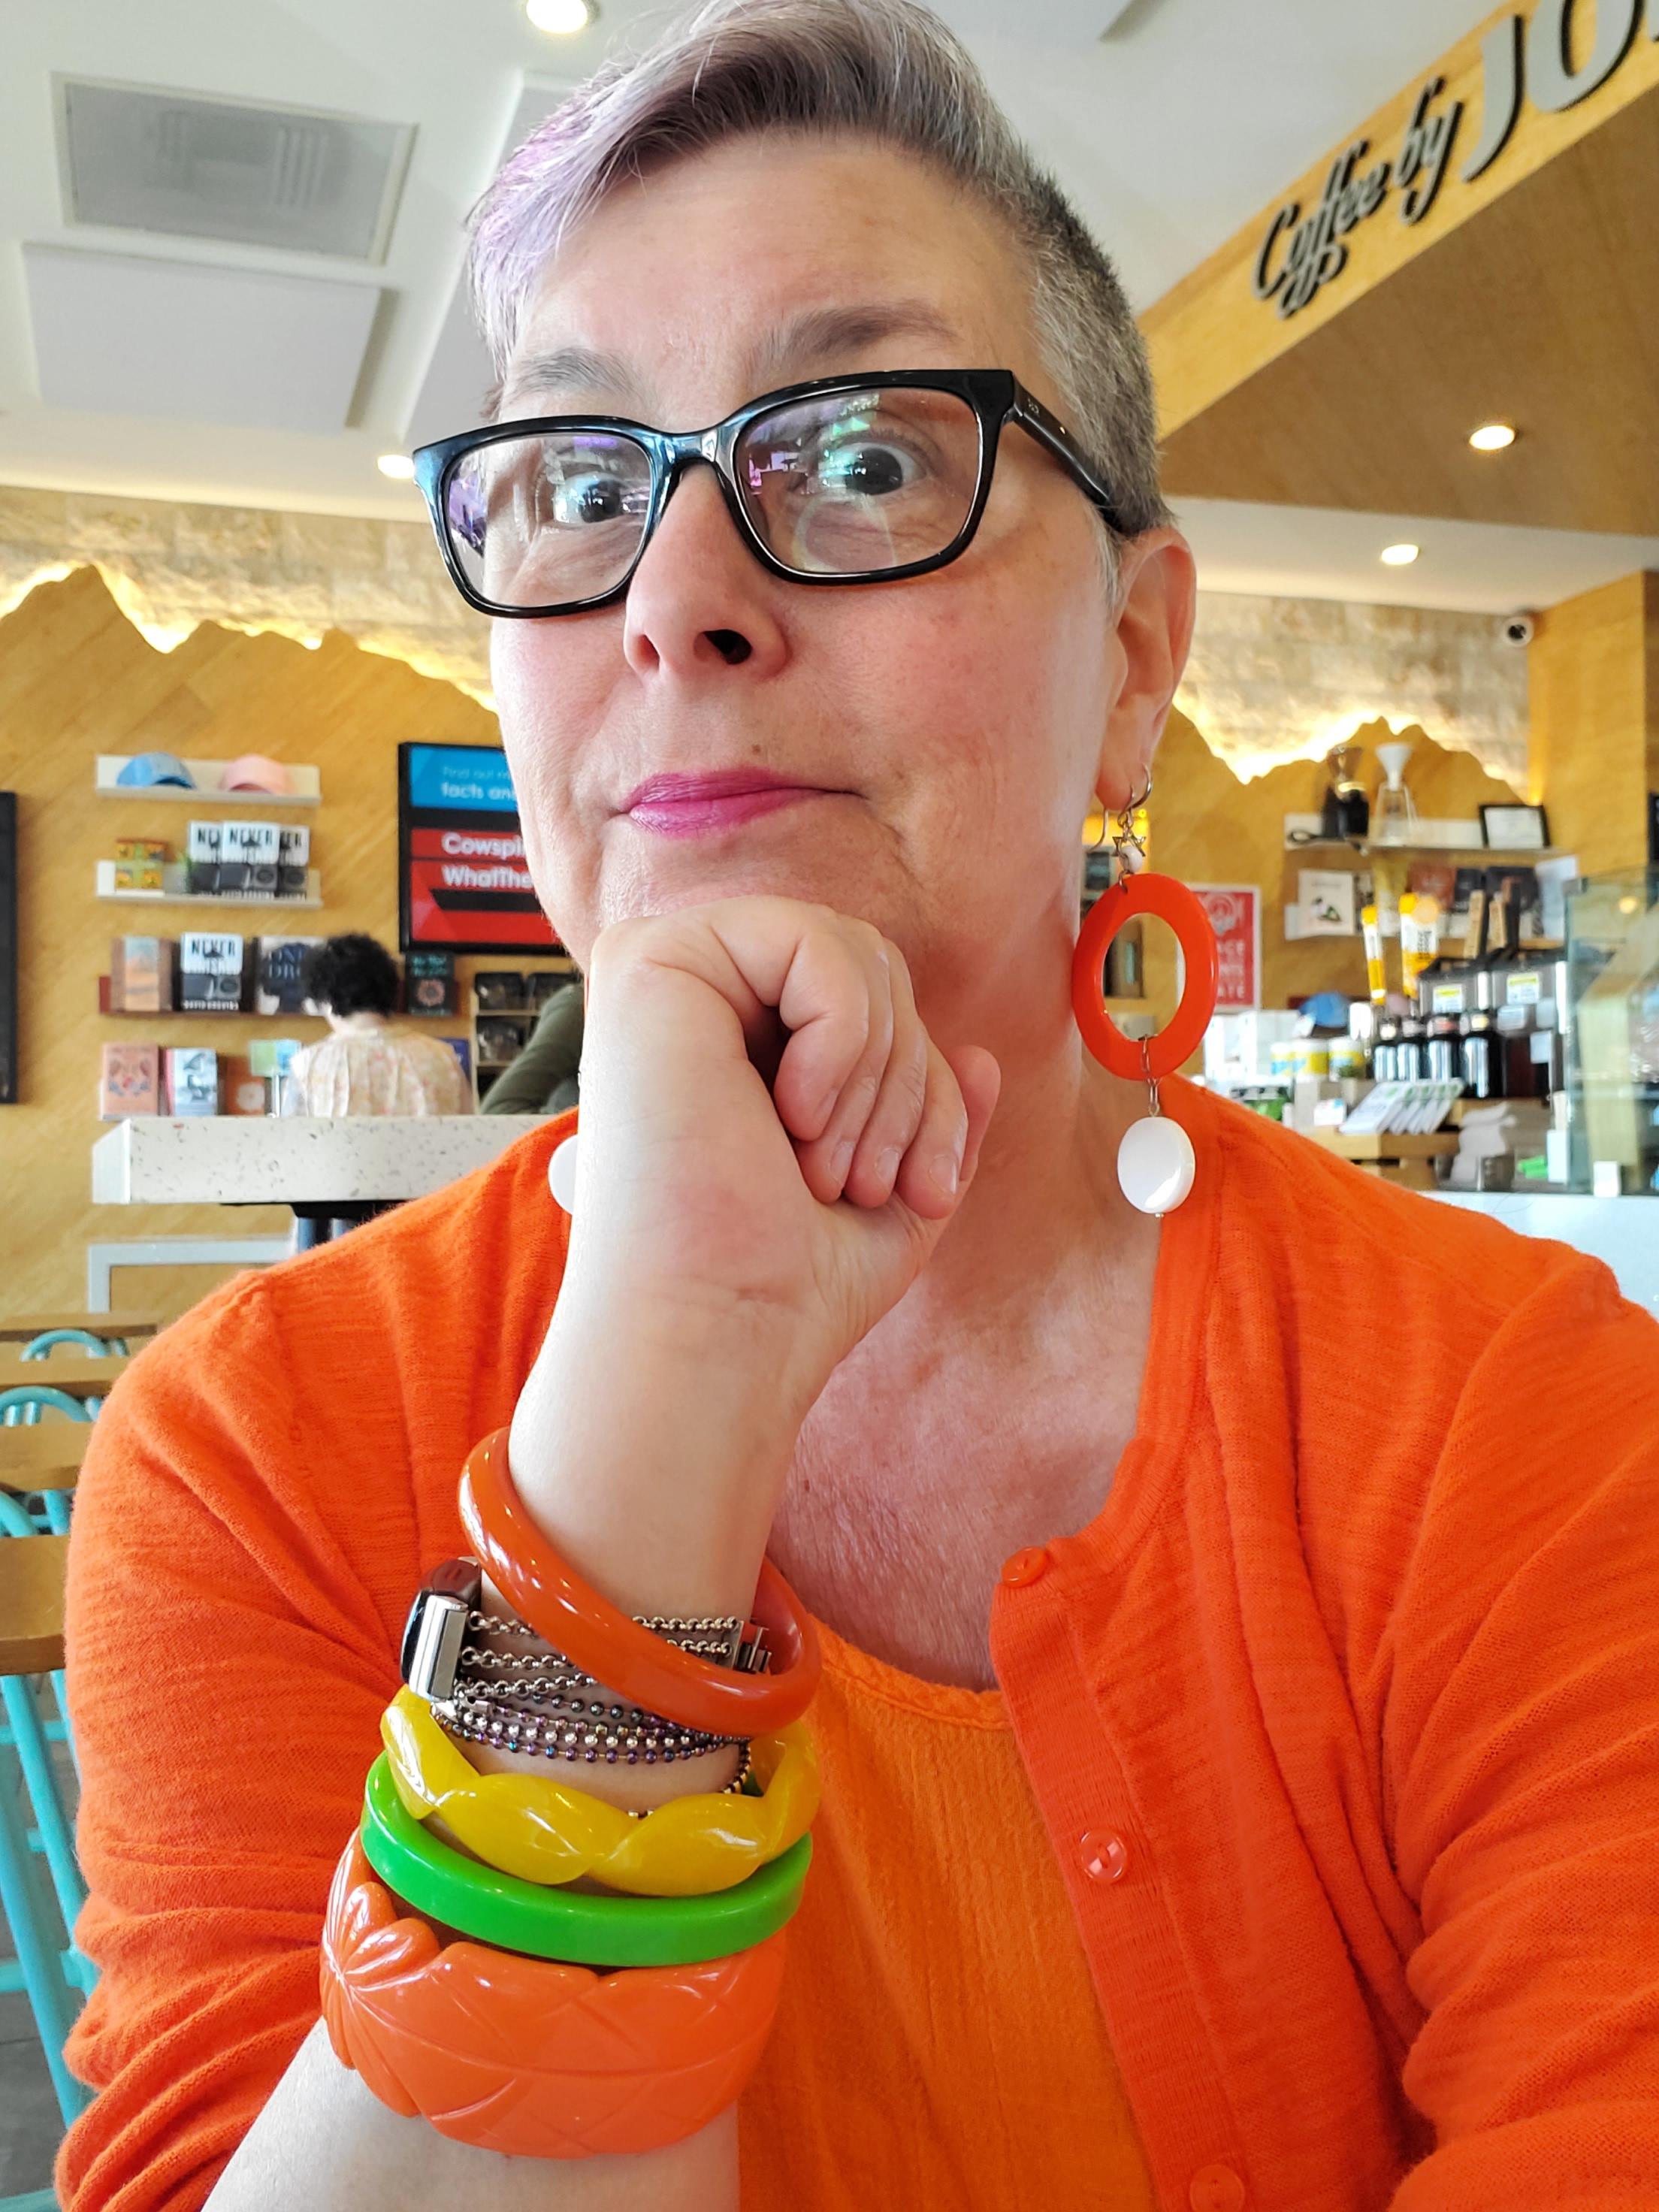 Picture of Lisa in an orange sweater, orange earrings, and orange, green and yellow bracelets.